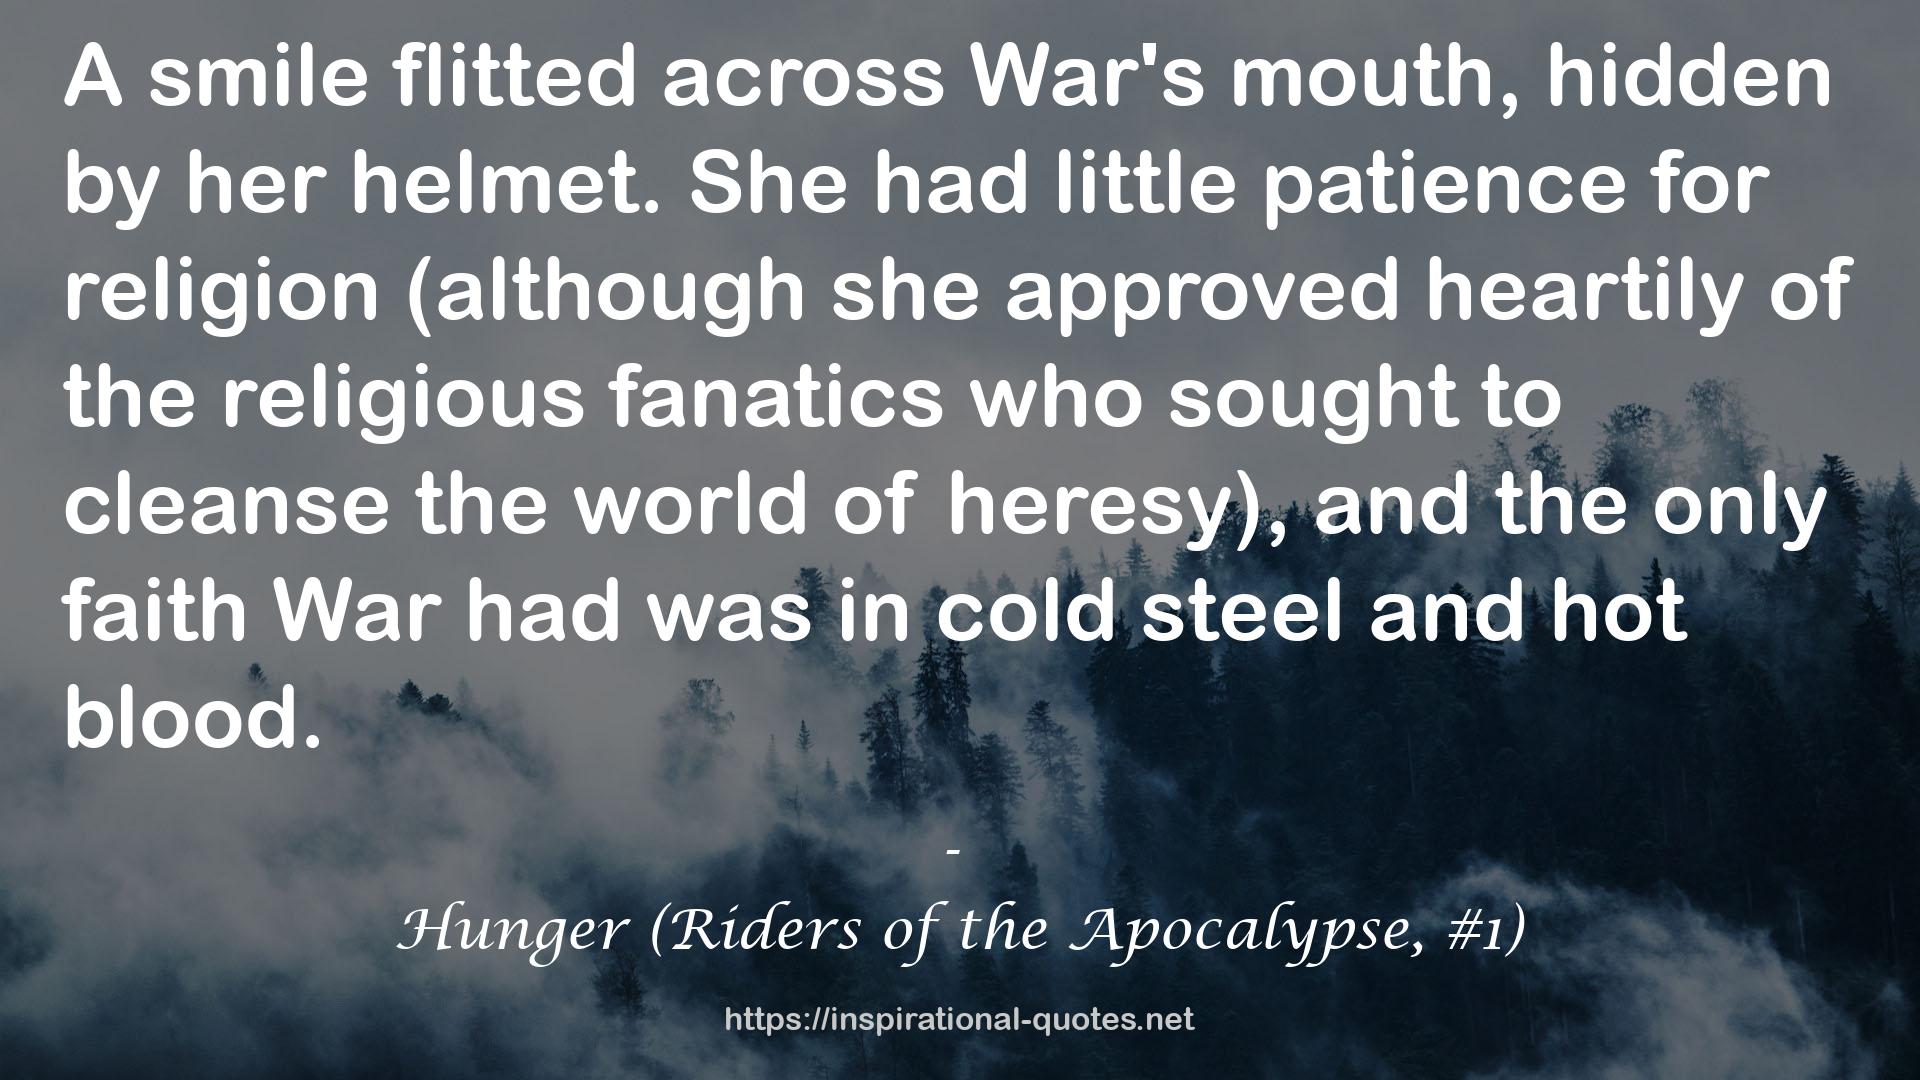 Hunger (Riders of the Apocalypse, #1) QUOTES